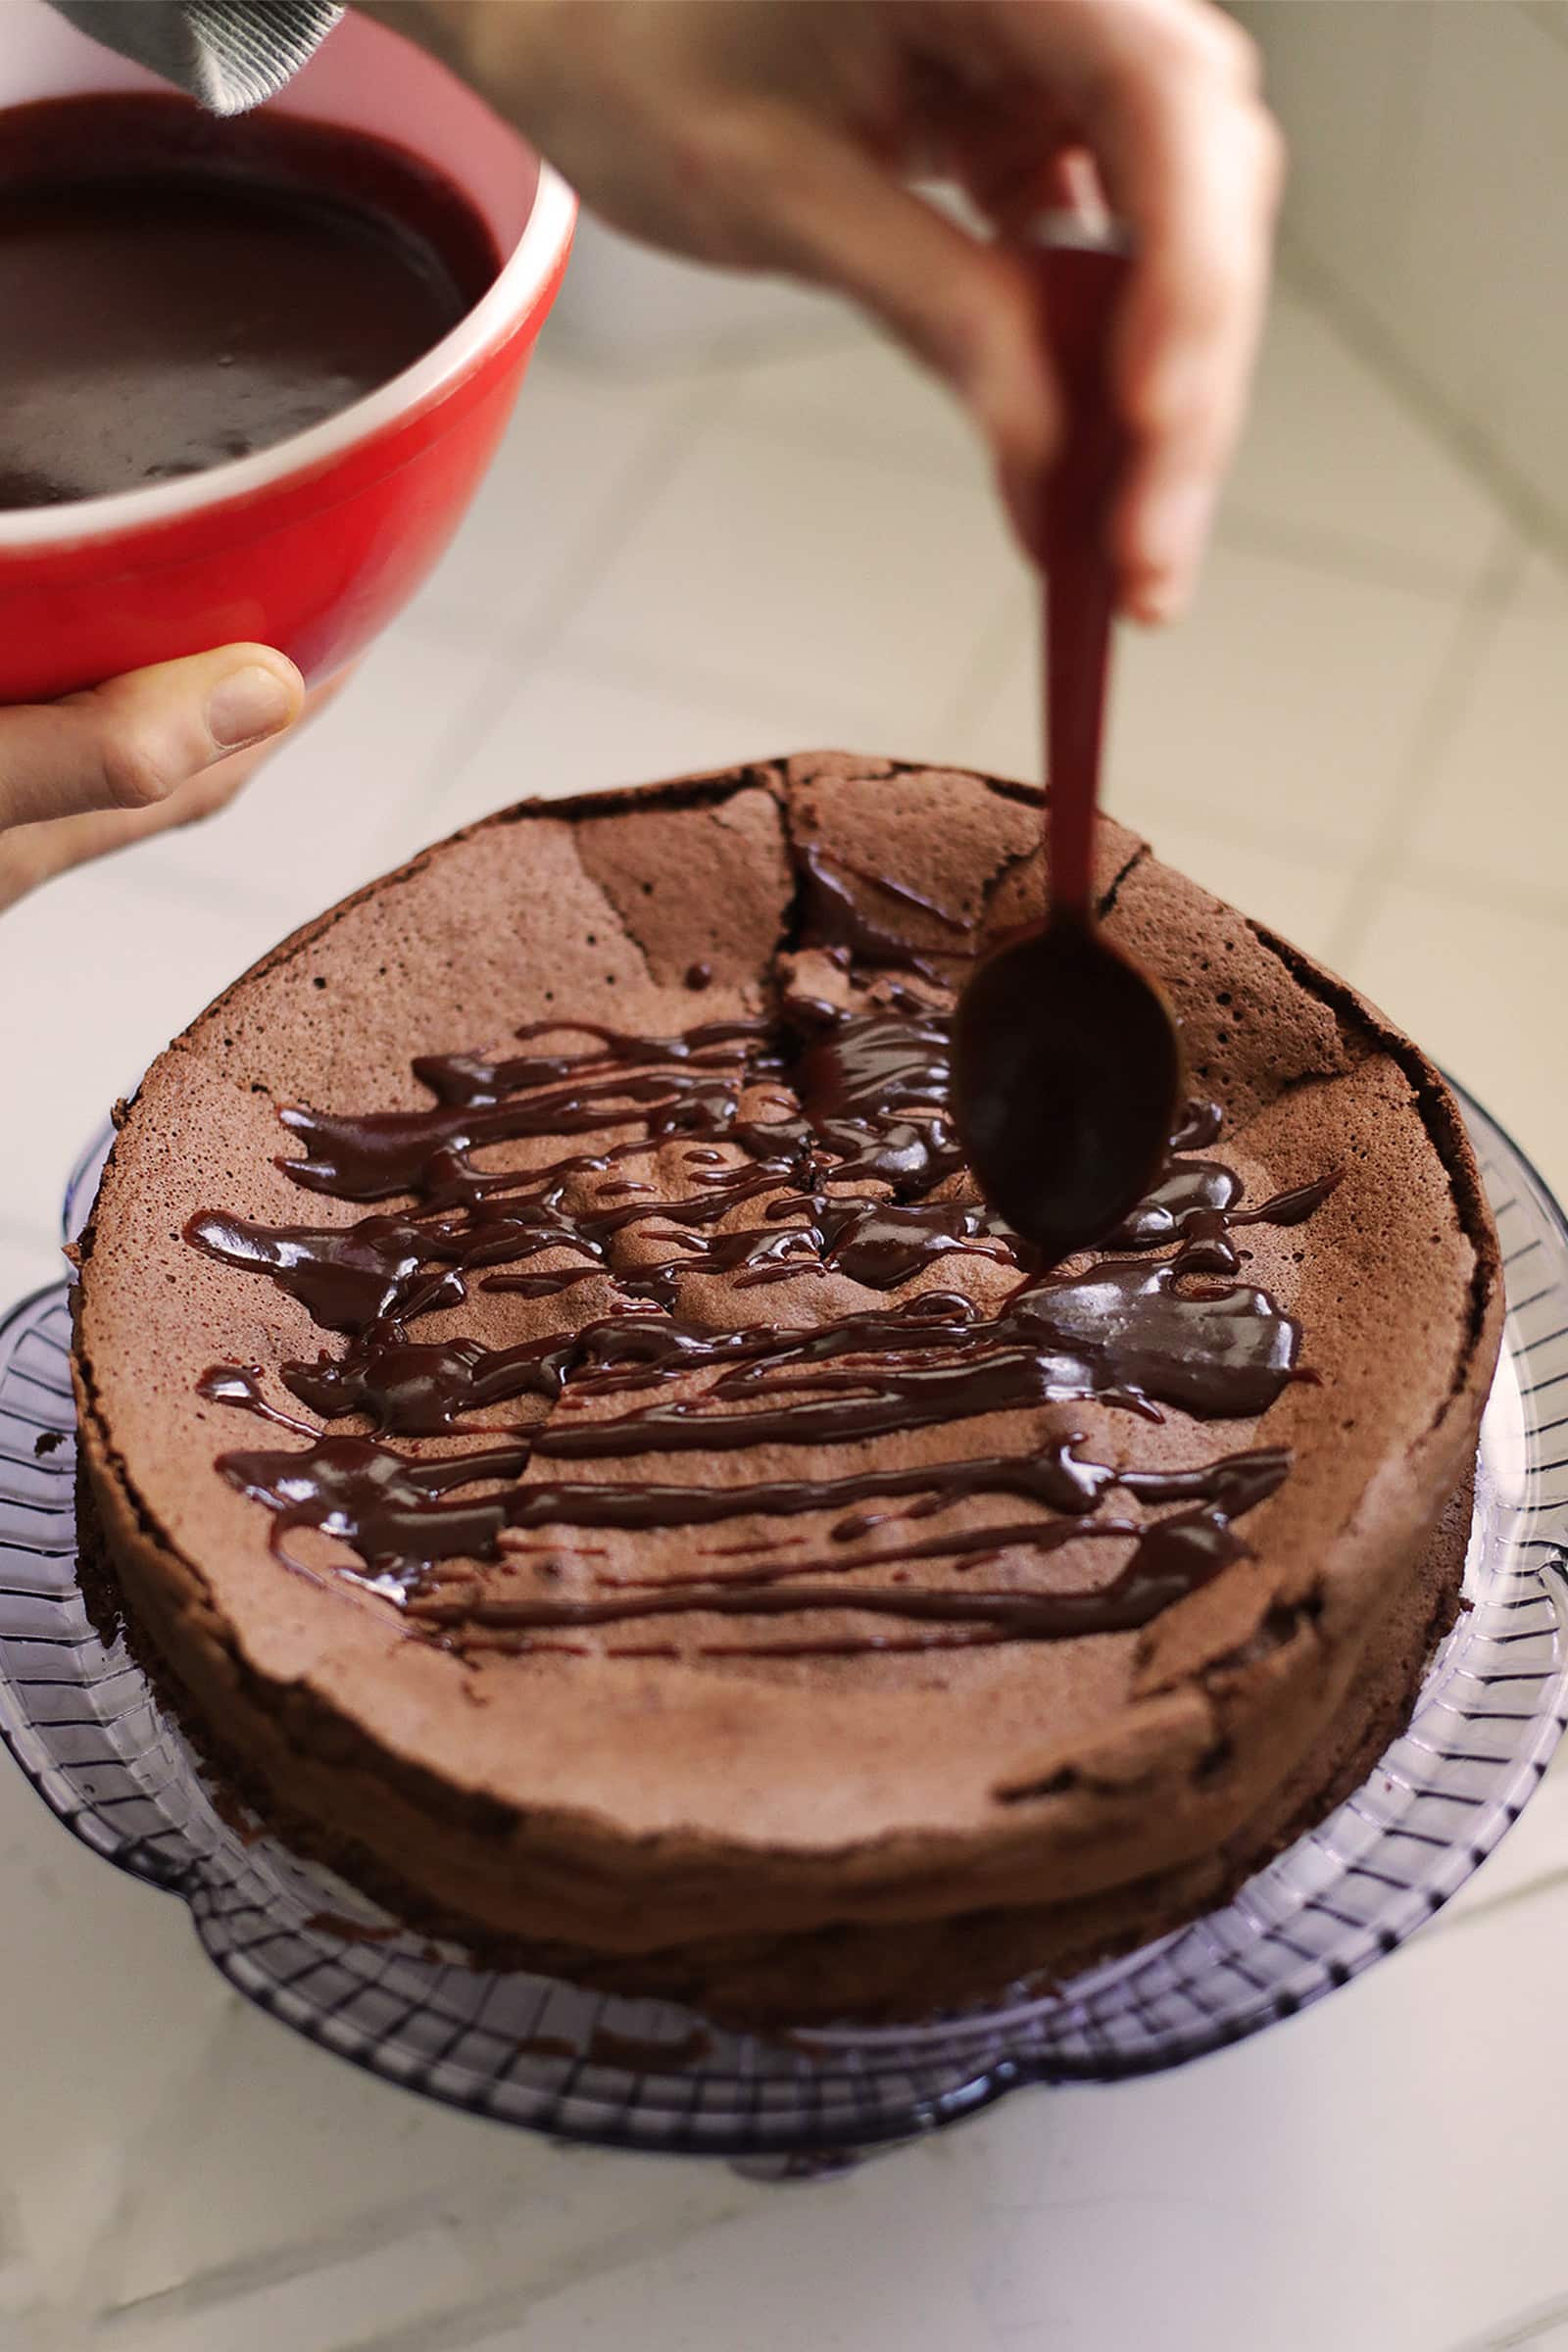 Chocolate Cake Drizzled With Sauce